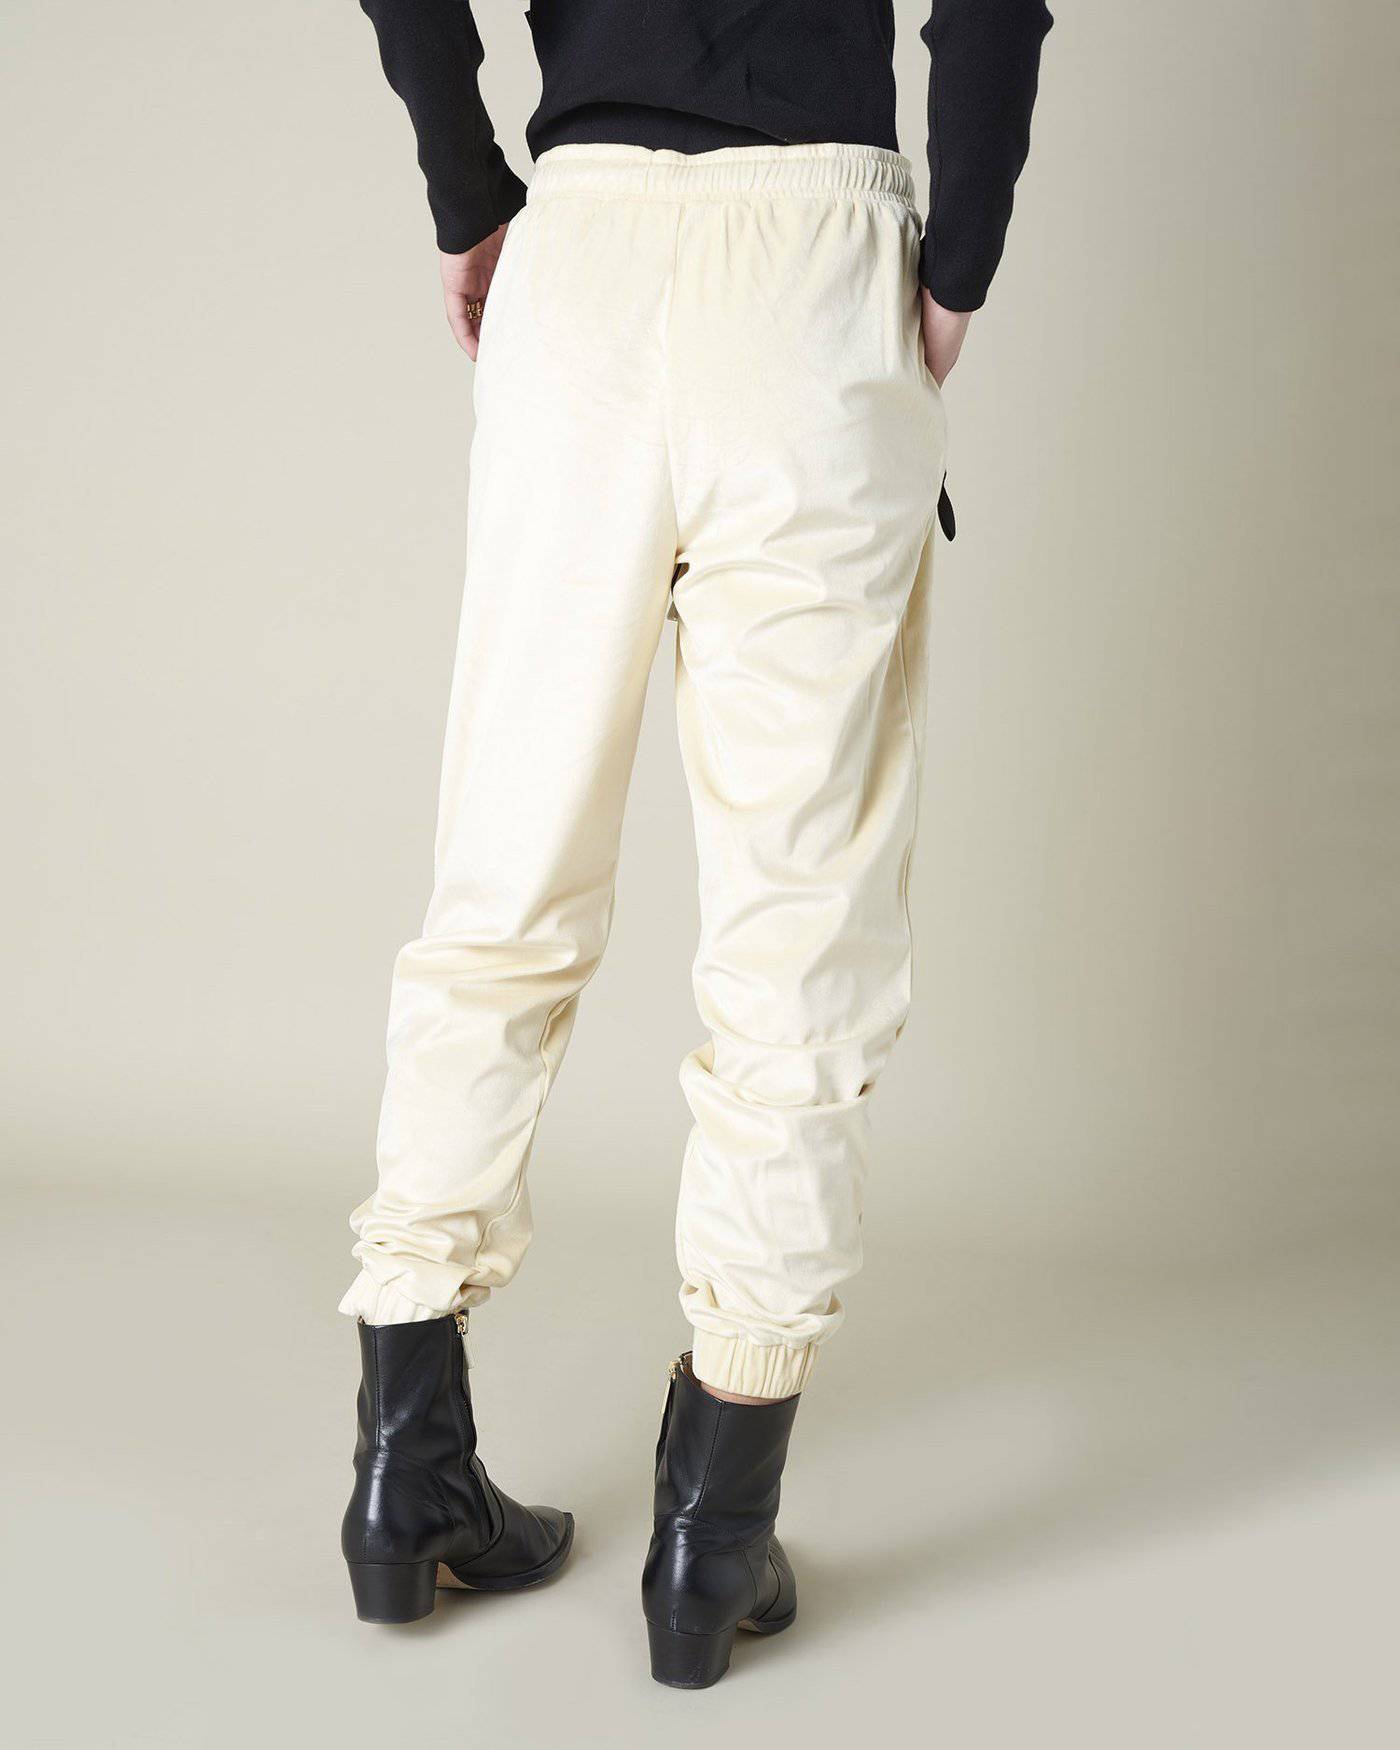 SPORT TROUSERS WITH CONTRASTING COLOR LACES SILVIAN HEACH - Bayolo Concept Store